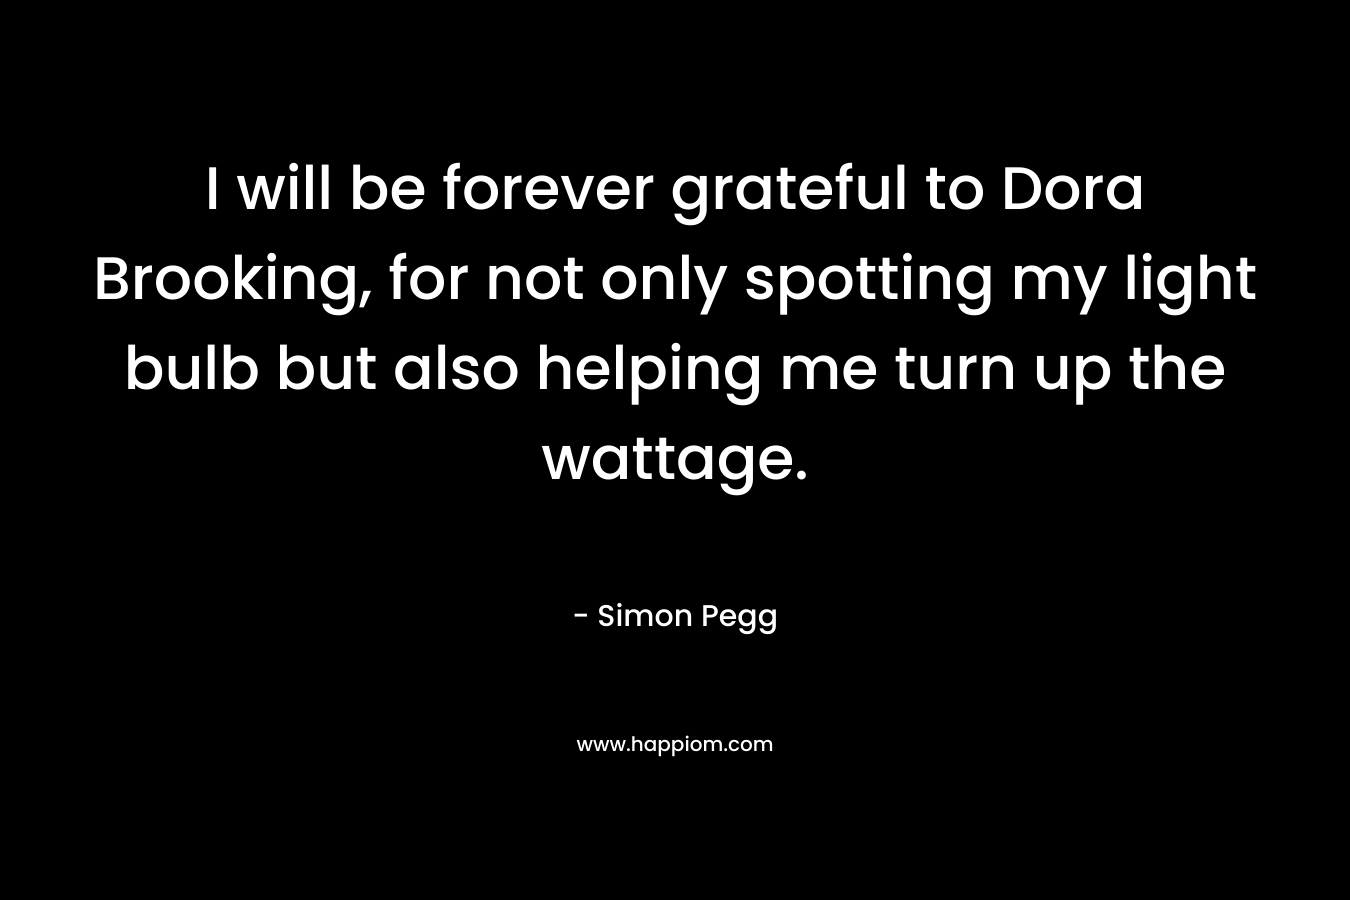 I will be forever grateful to Dora Brooking, for not only spotting my light bulb but also helping me turn up the wattage. – Simon Pegg